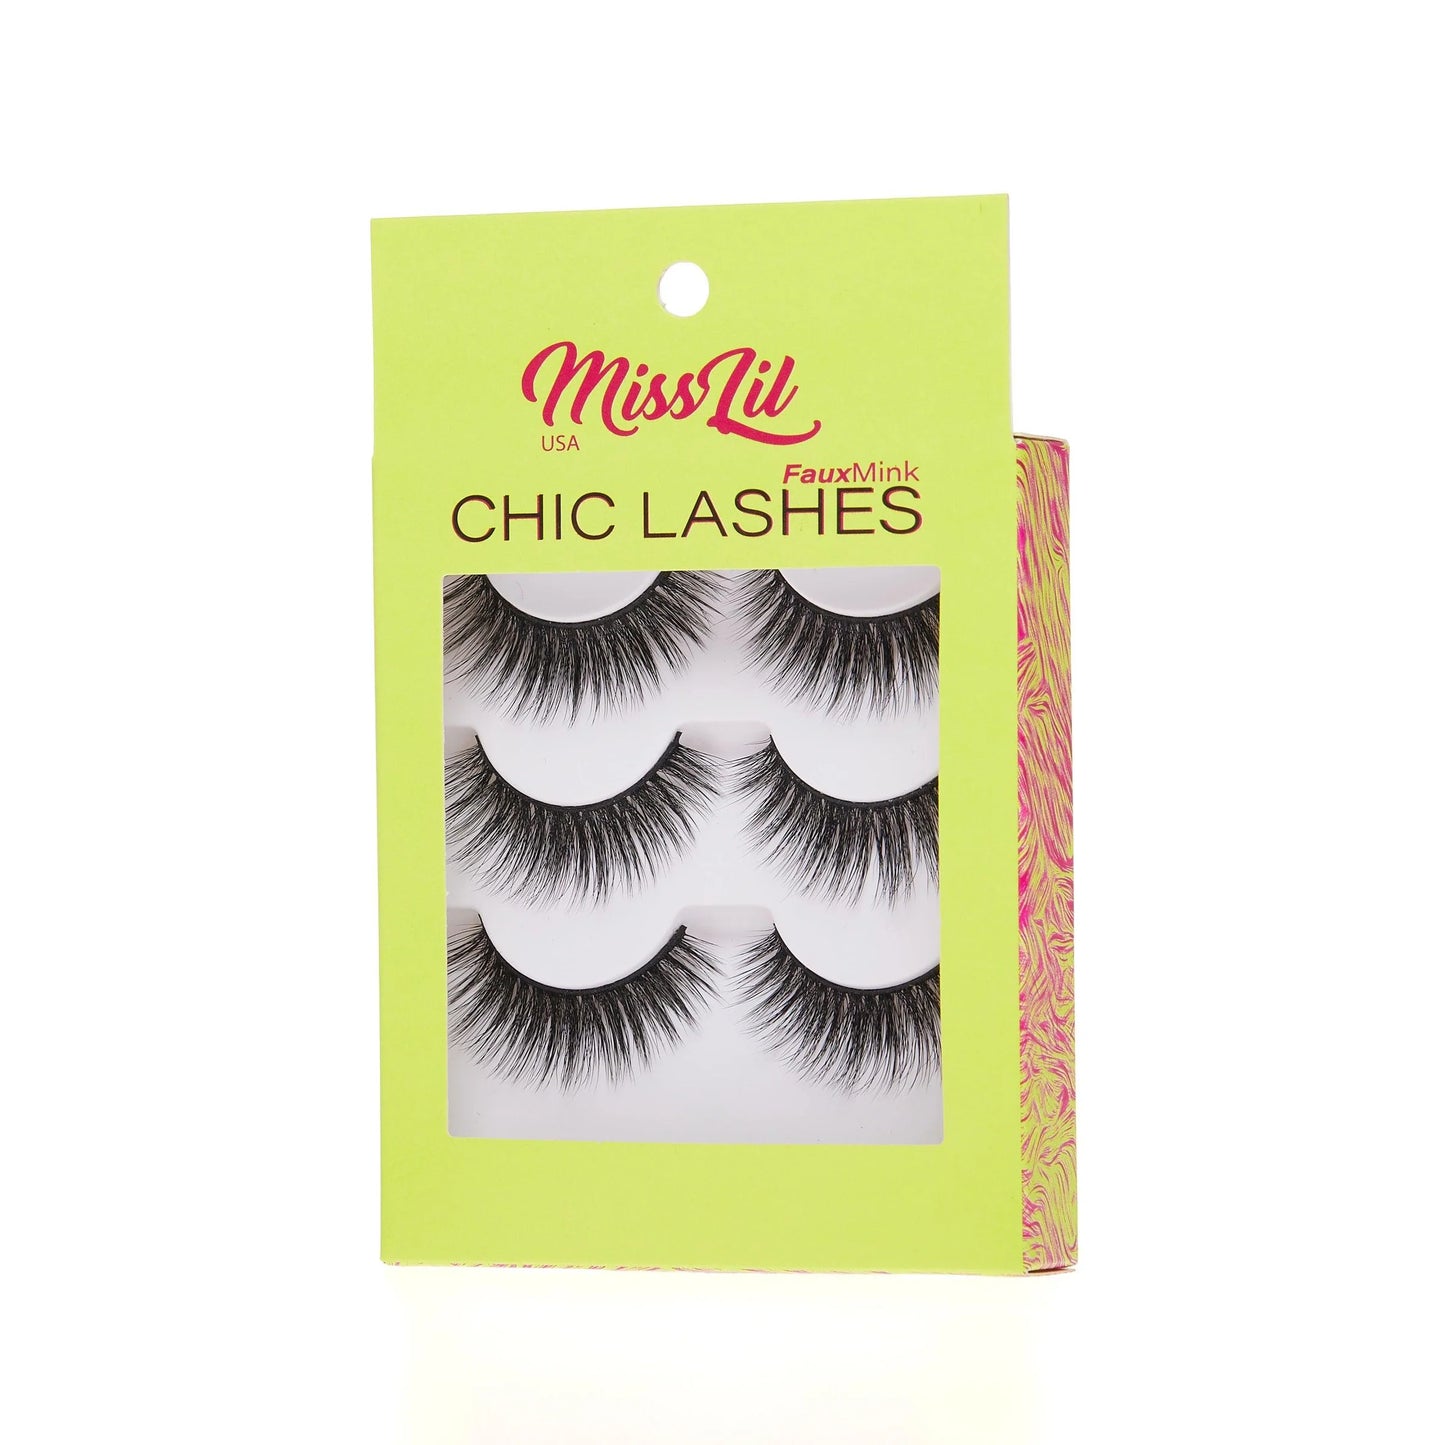 3-Pair Faux Mink Eyelashes - Chic Lashes Collection #30